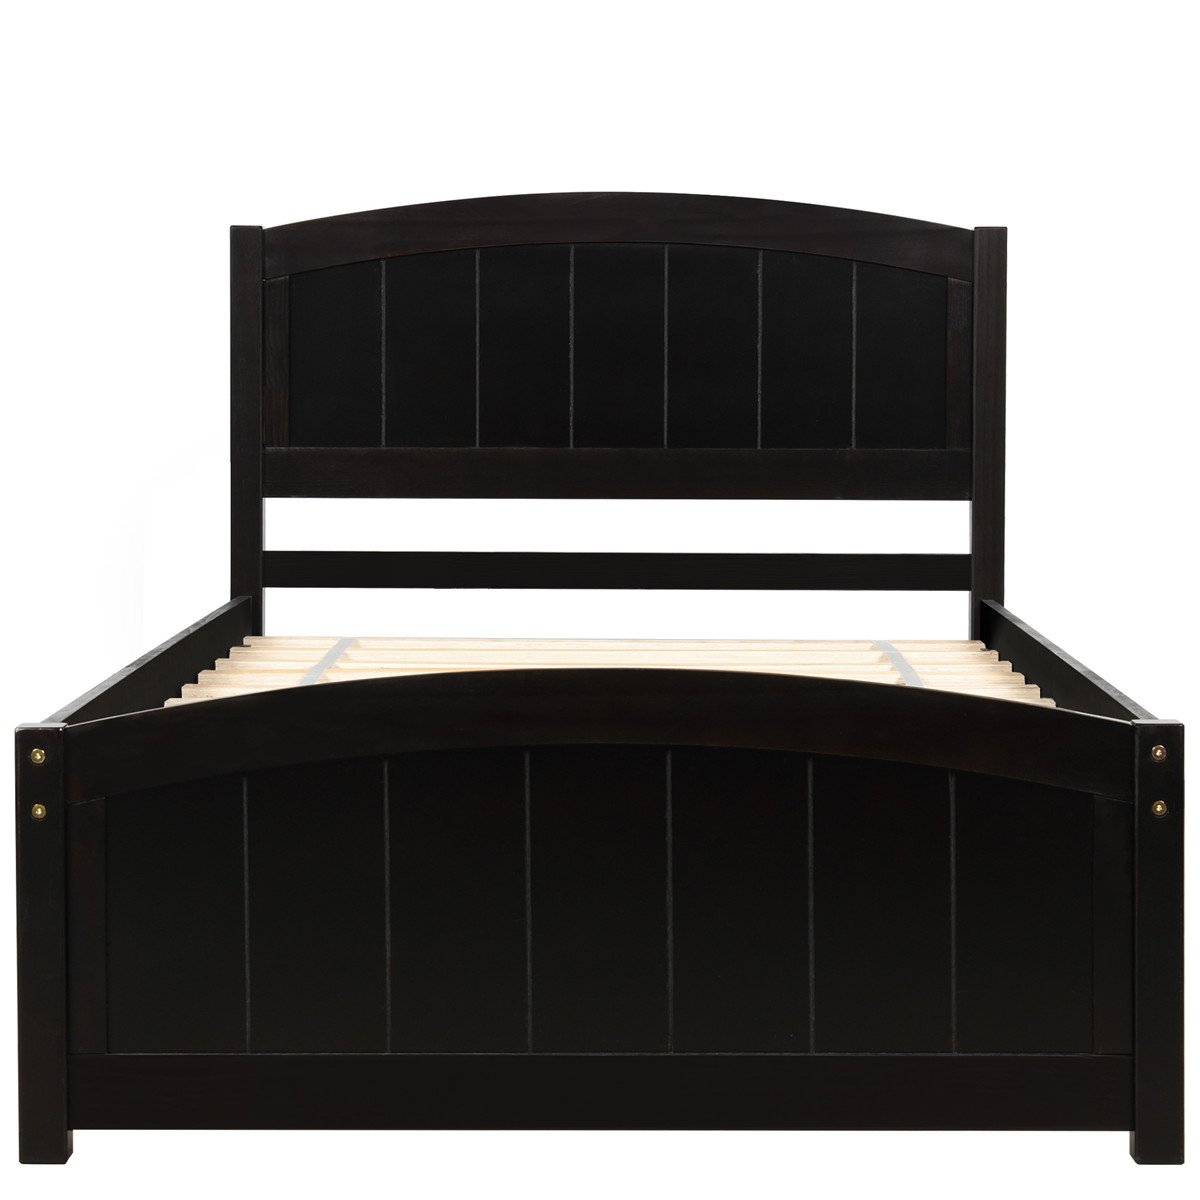 Wood Platform Bed with Headboard | Footboard and Wood Slat Support | Espresso